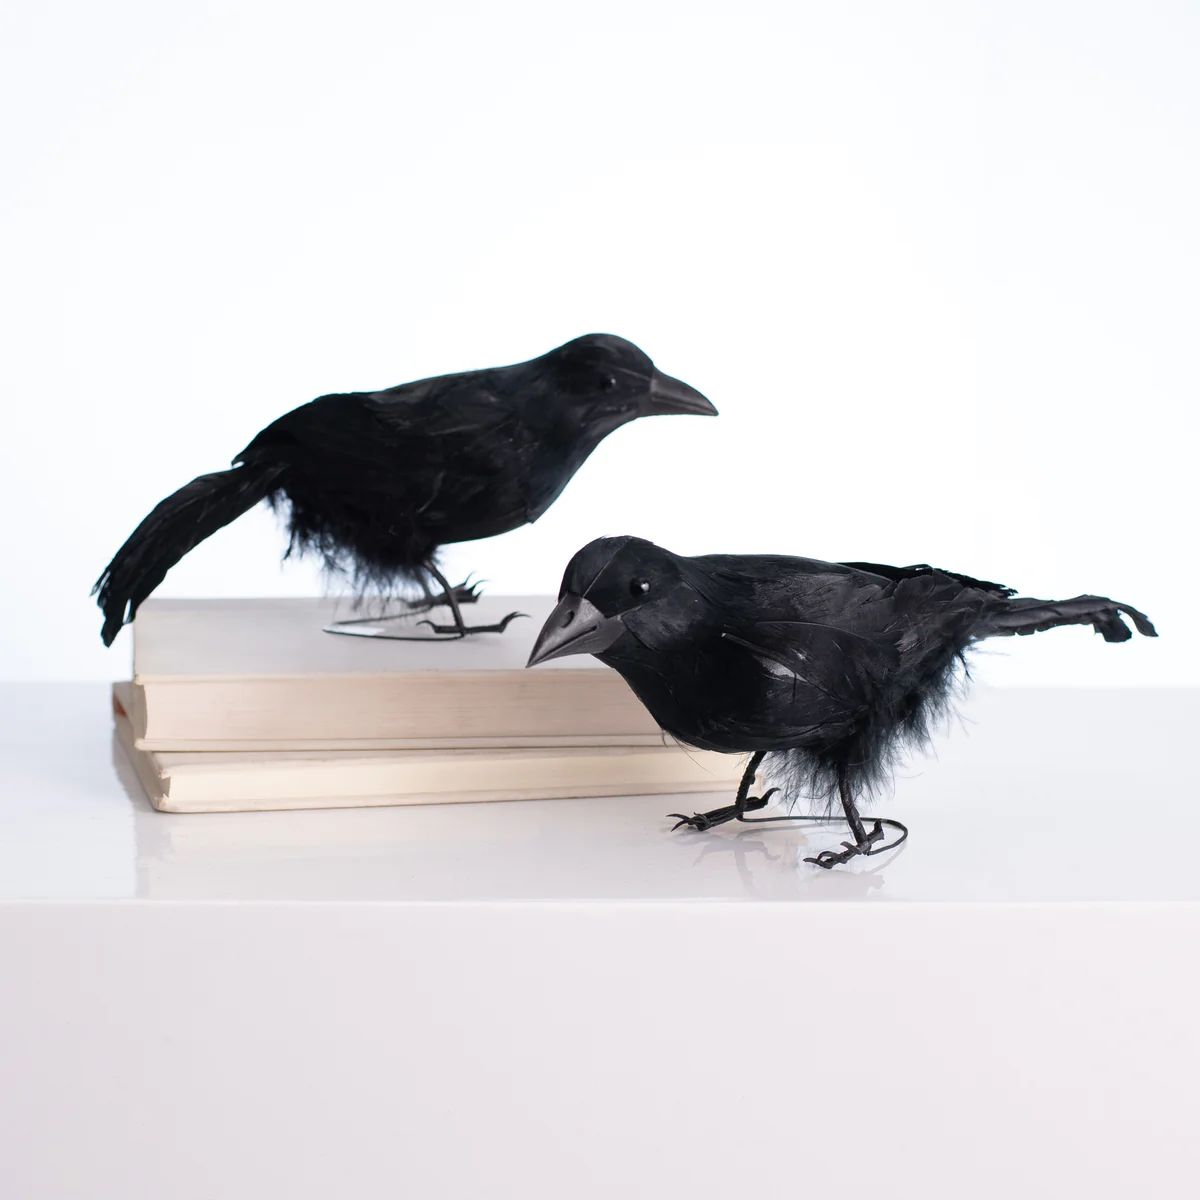 Black Feathered Crow Standing Raven Halloween Decoration Prop Set of 2 | Darby Creek Trading